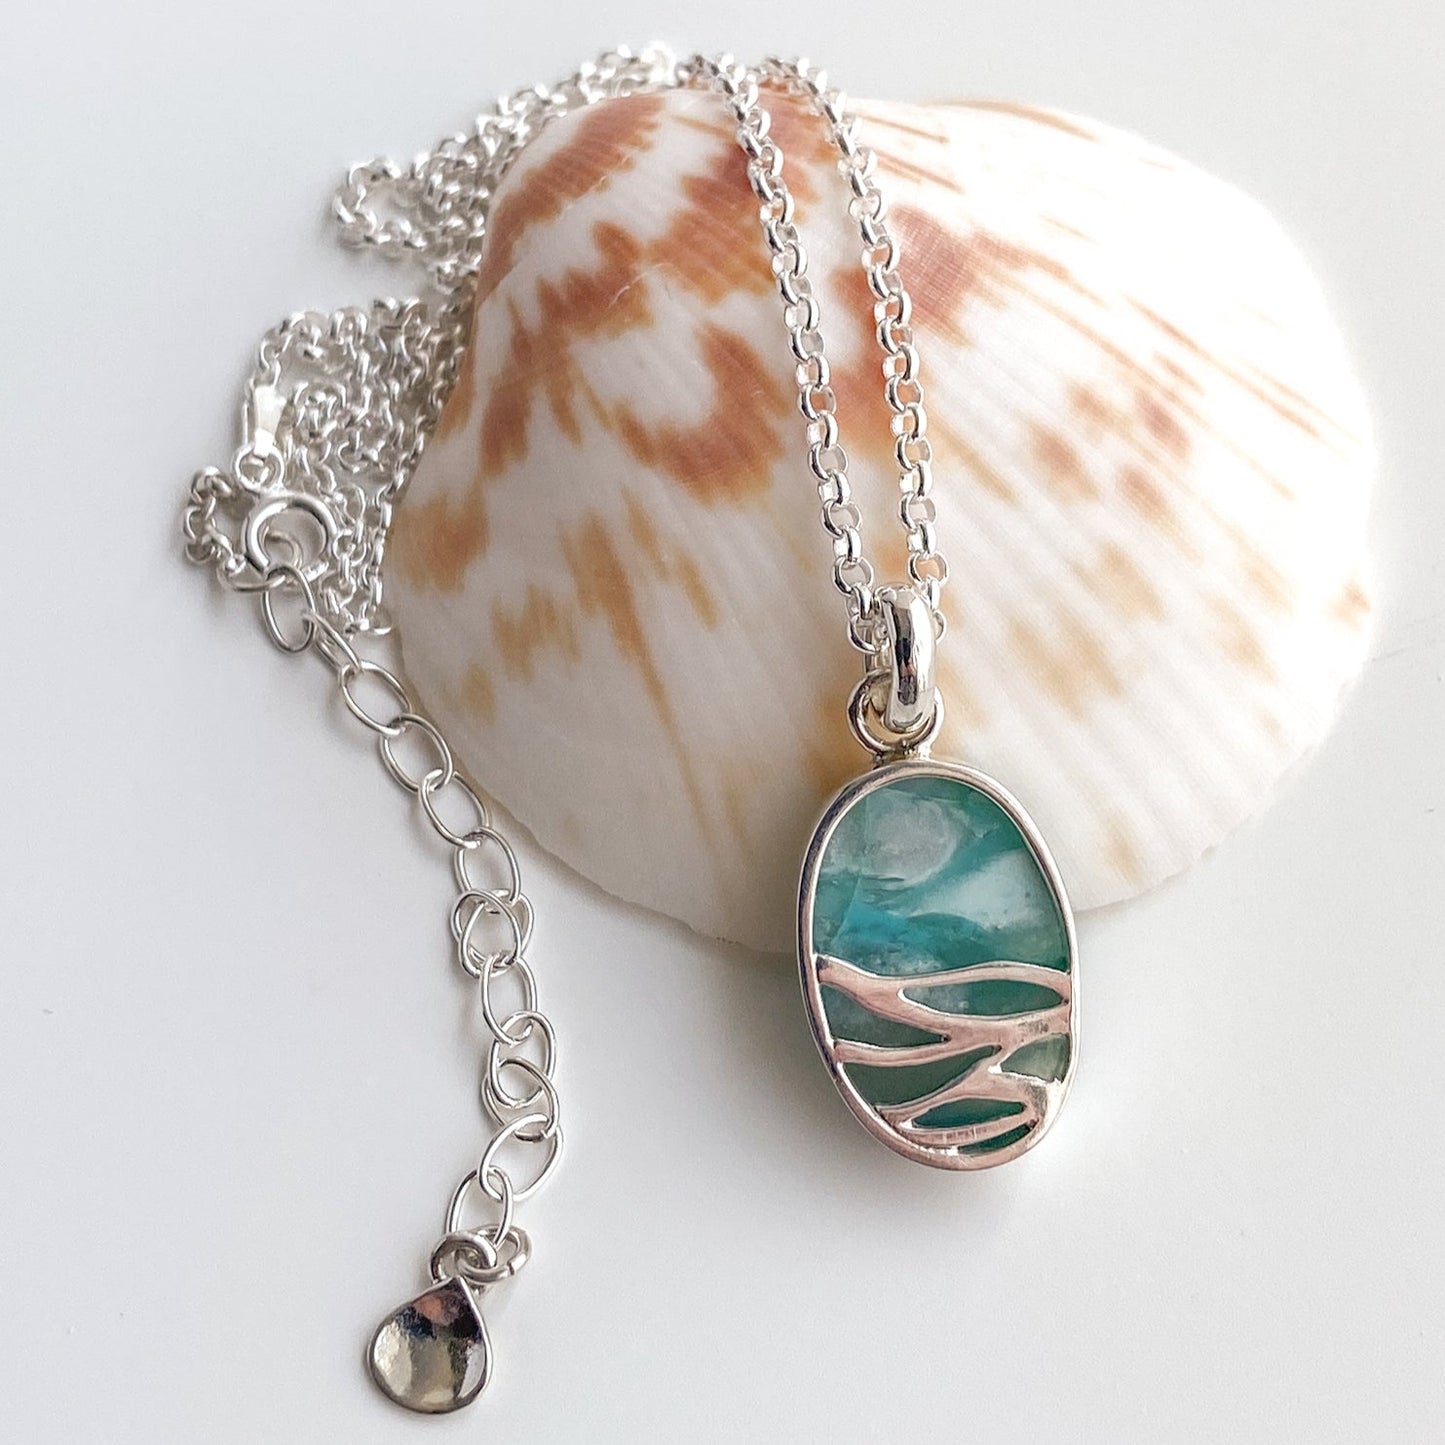 closeup view of the reverse side of the pendant revealing the waves cut out design and the backside of the teal and aqua stone